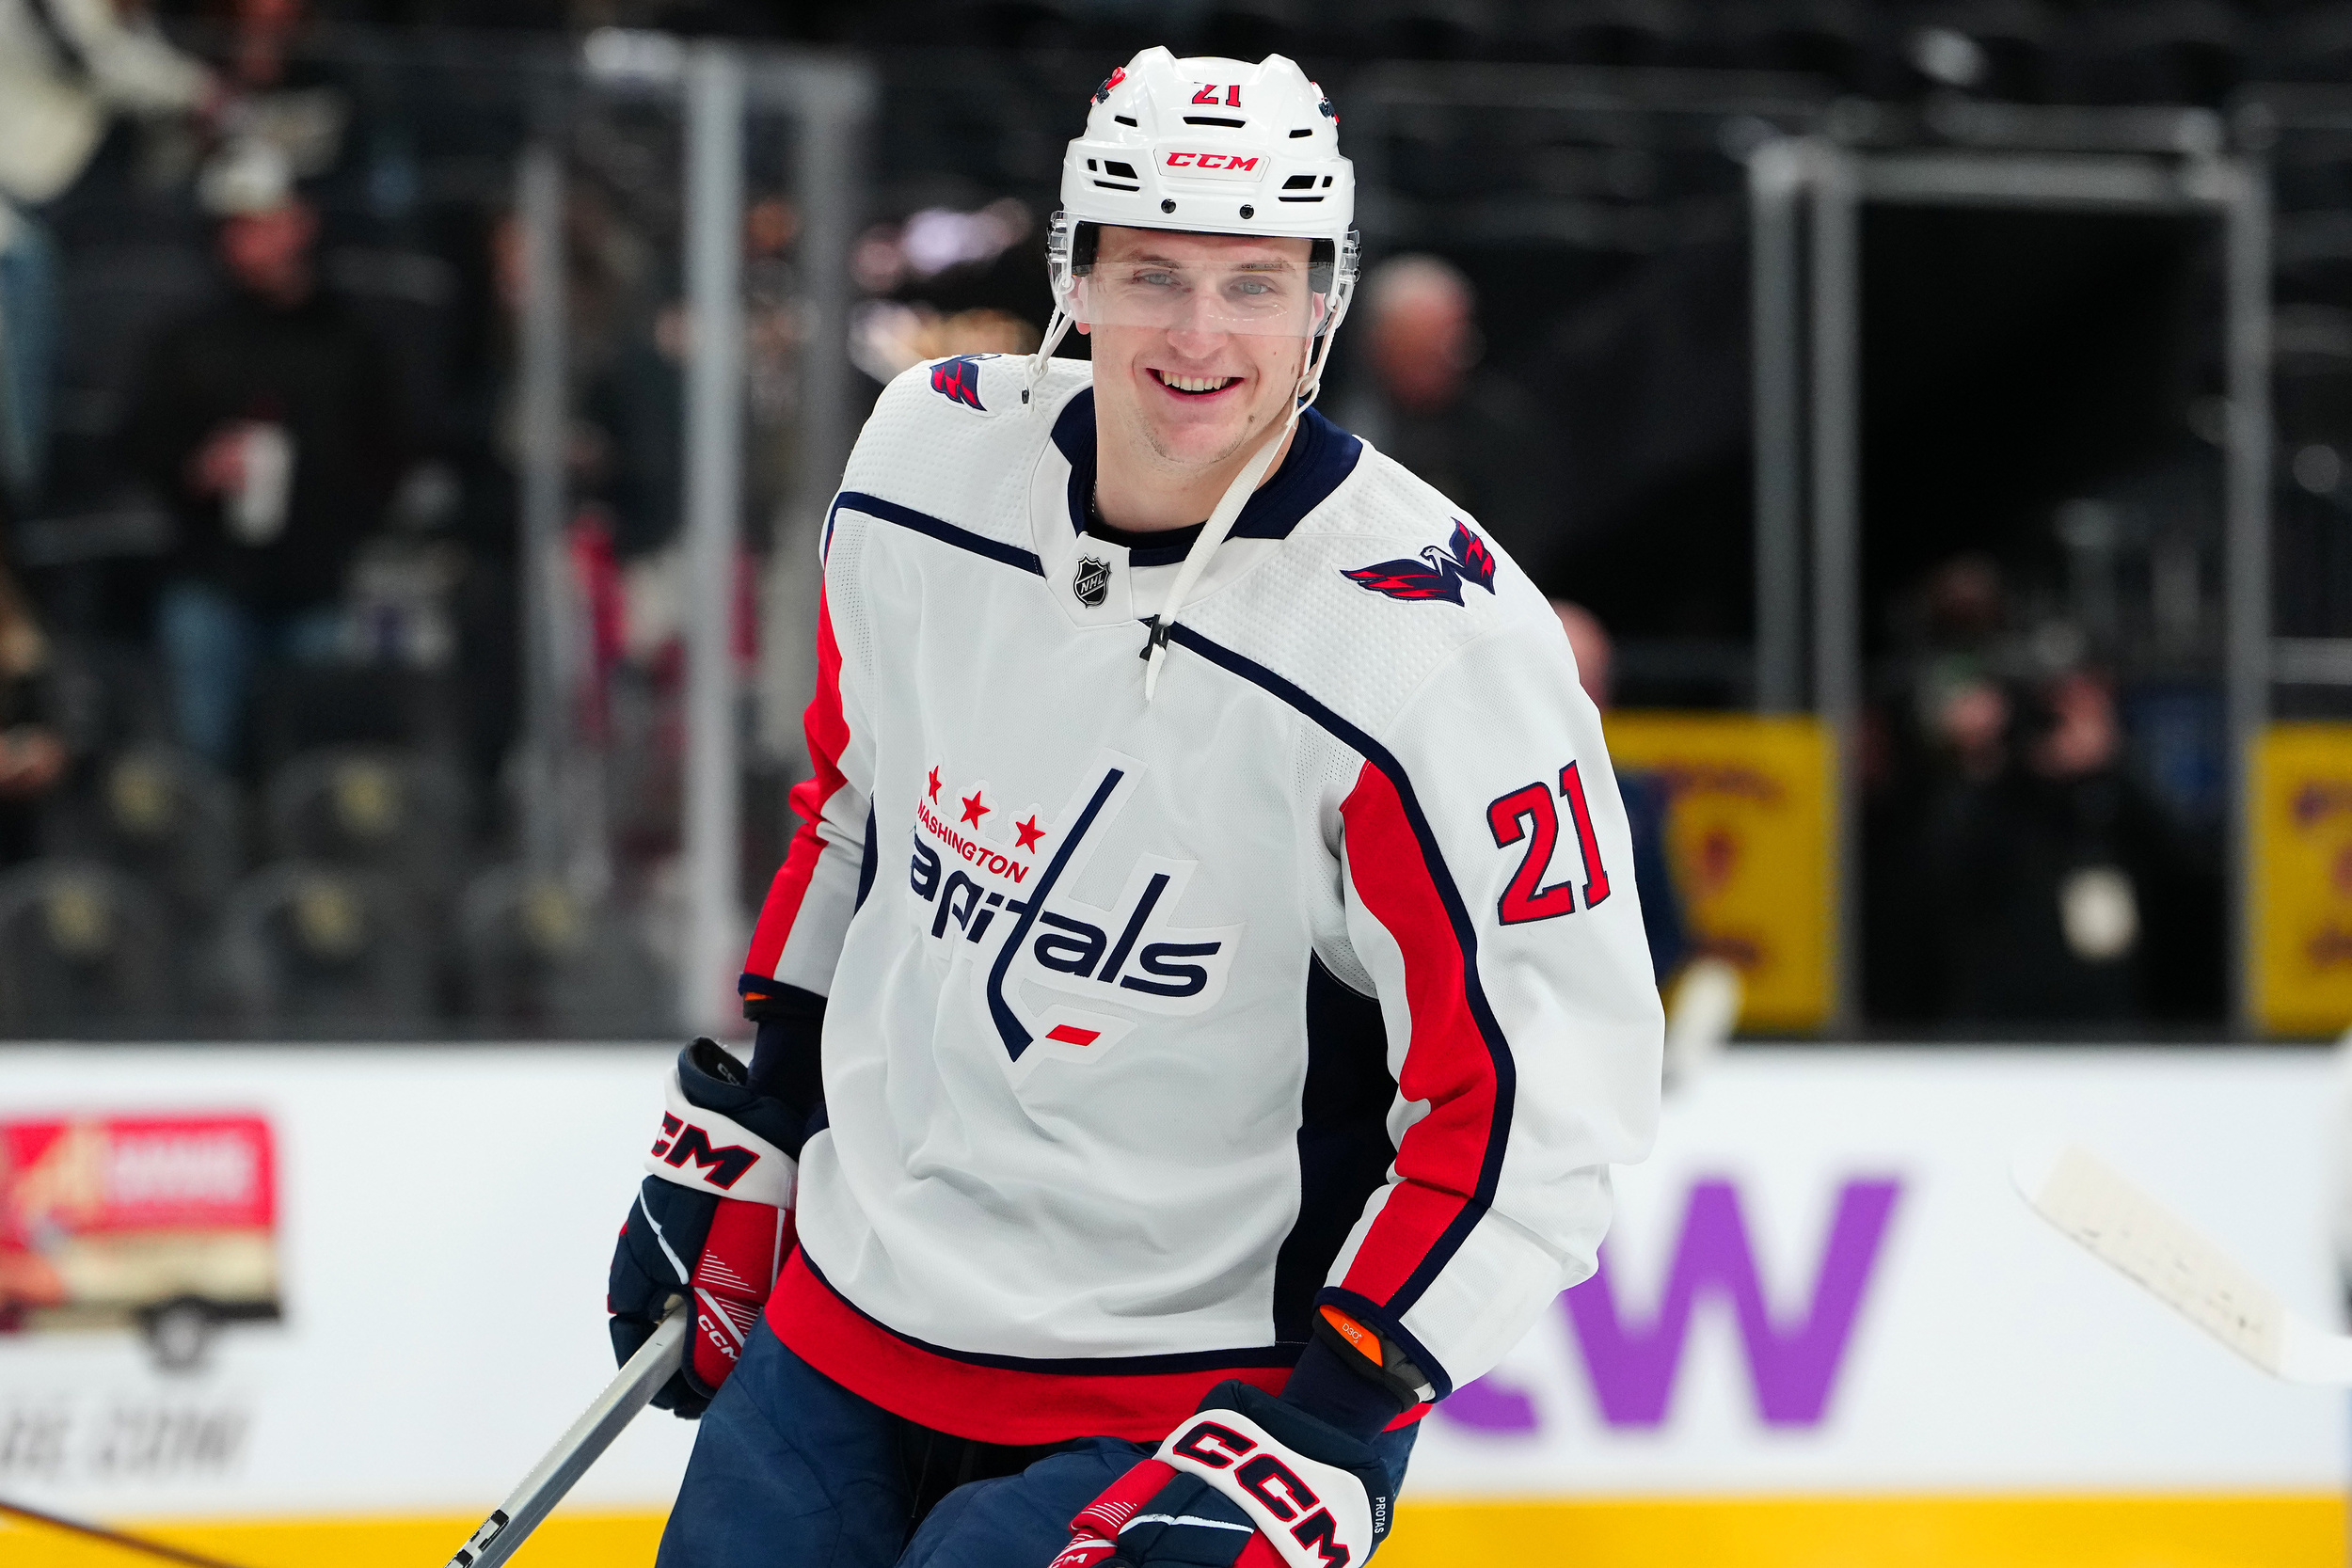 capitals sign one of the nhl's tallest players to five-year extension